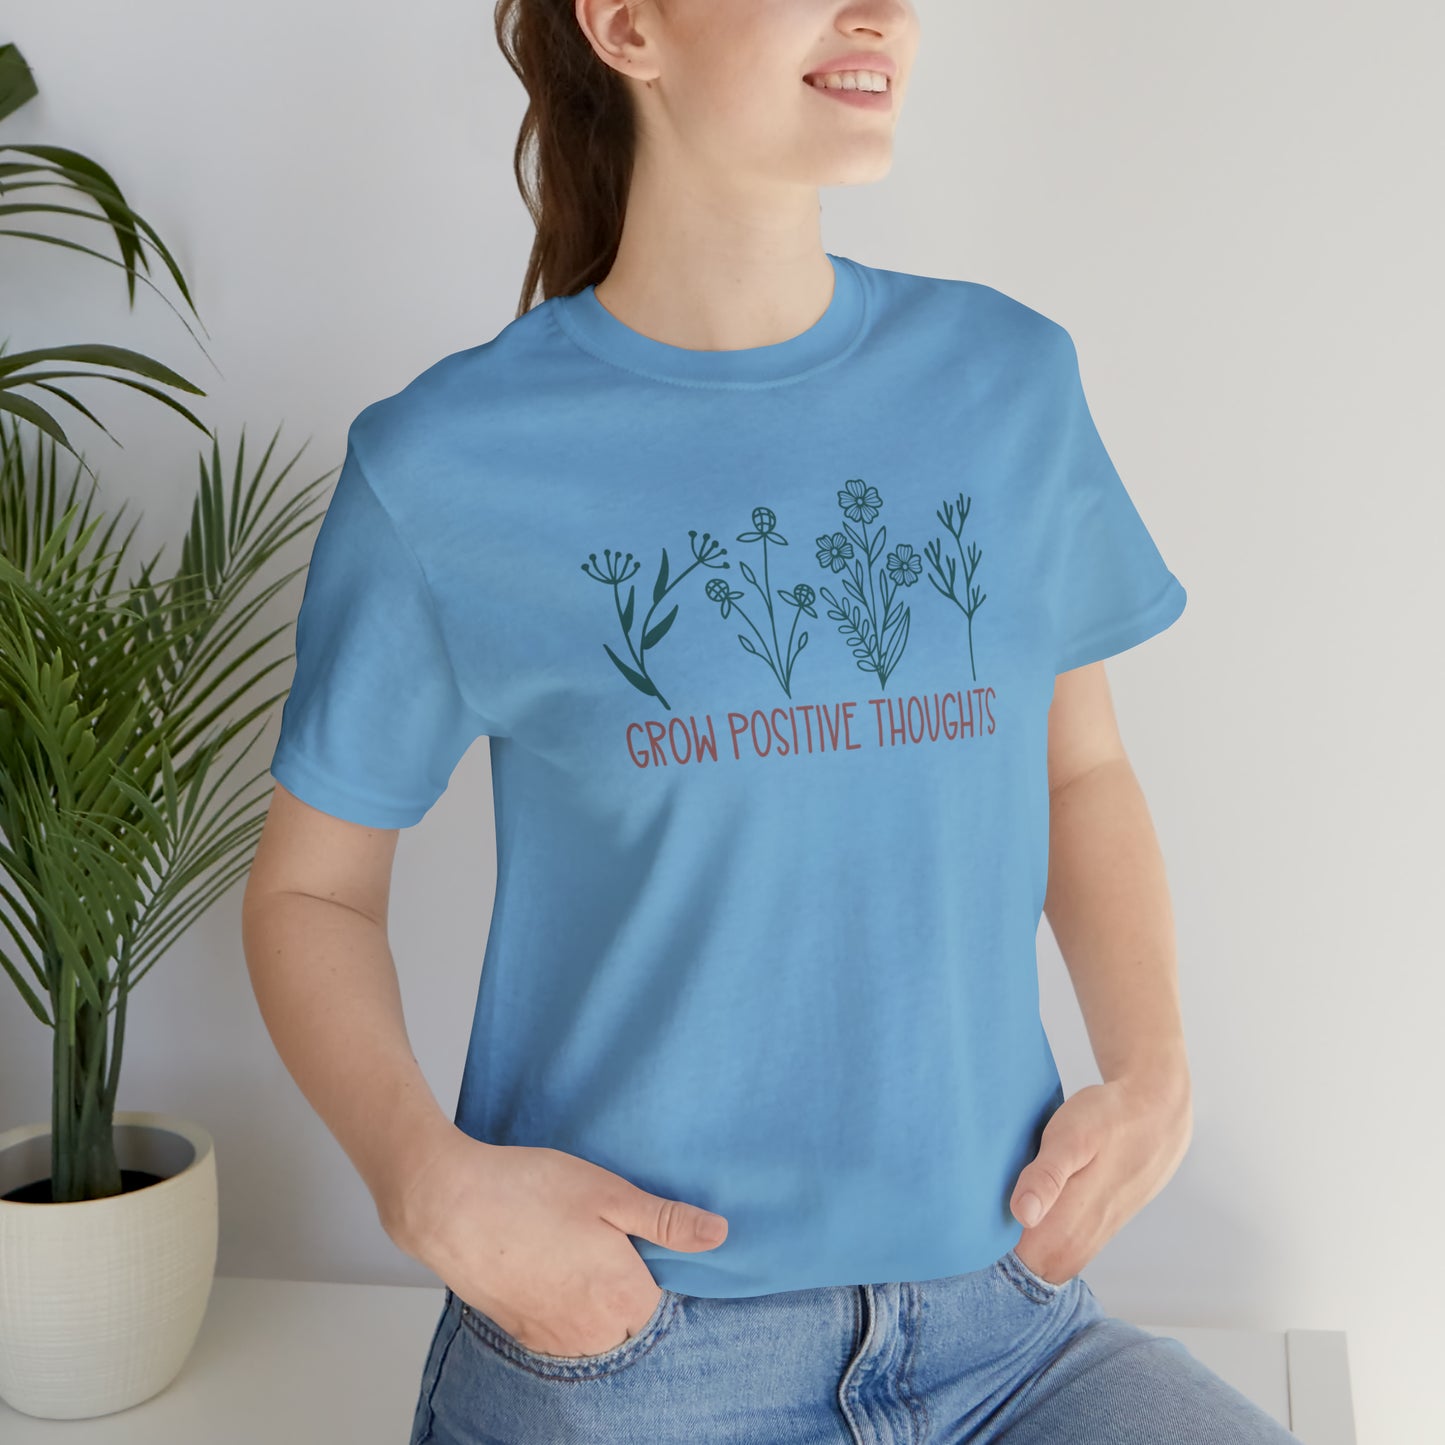 Wildflowers Graphic T-Shirt for Women | Grow Positive Thoughts Top | graphic wildflower tshirt | Hiking Outdoor Camping Botanical Tee |